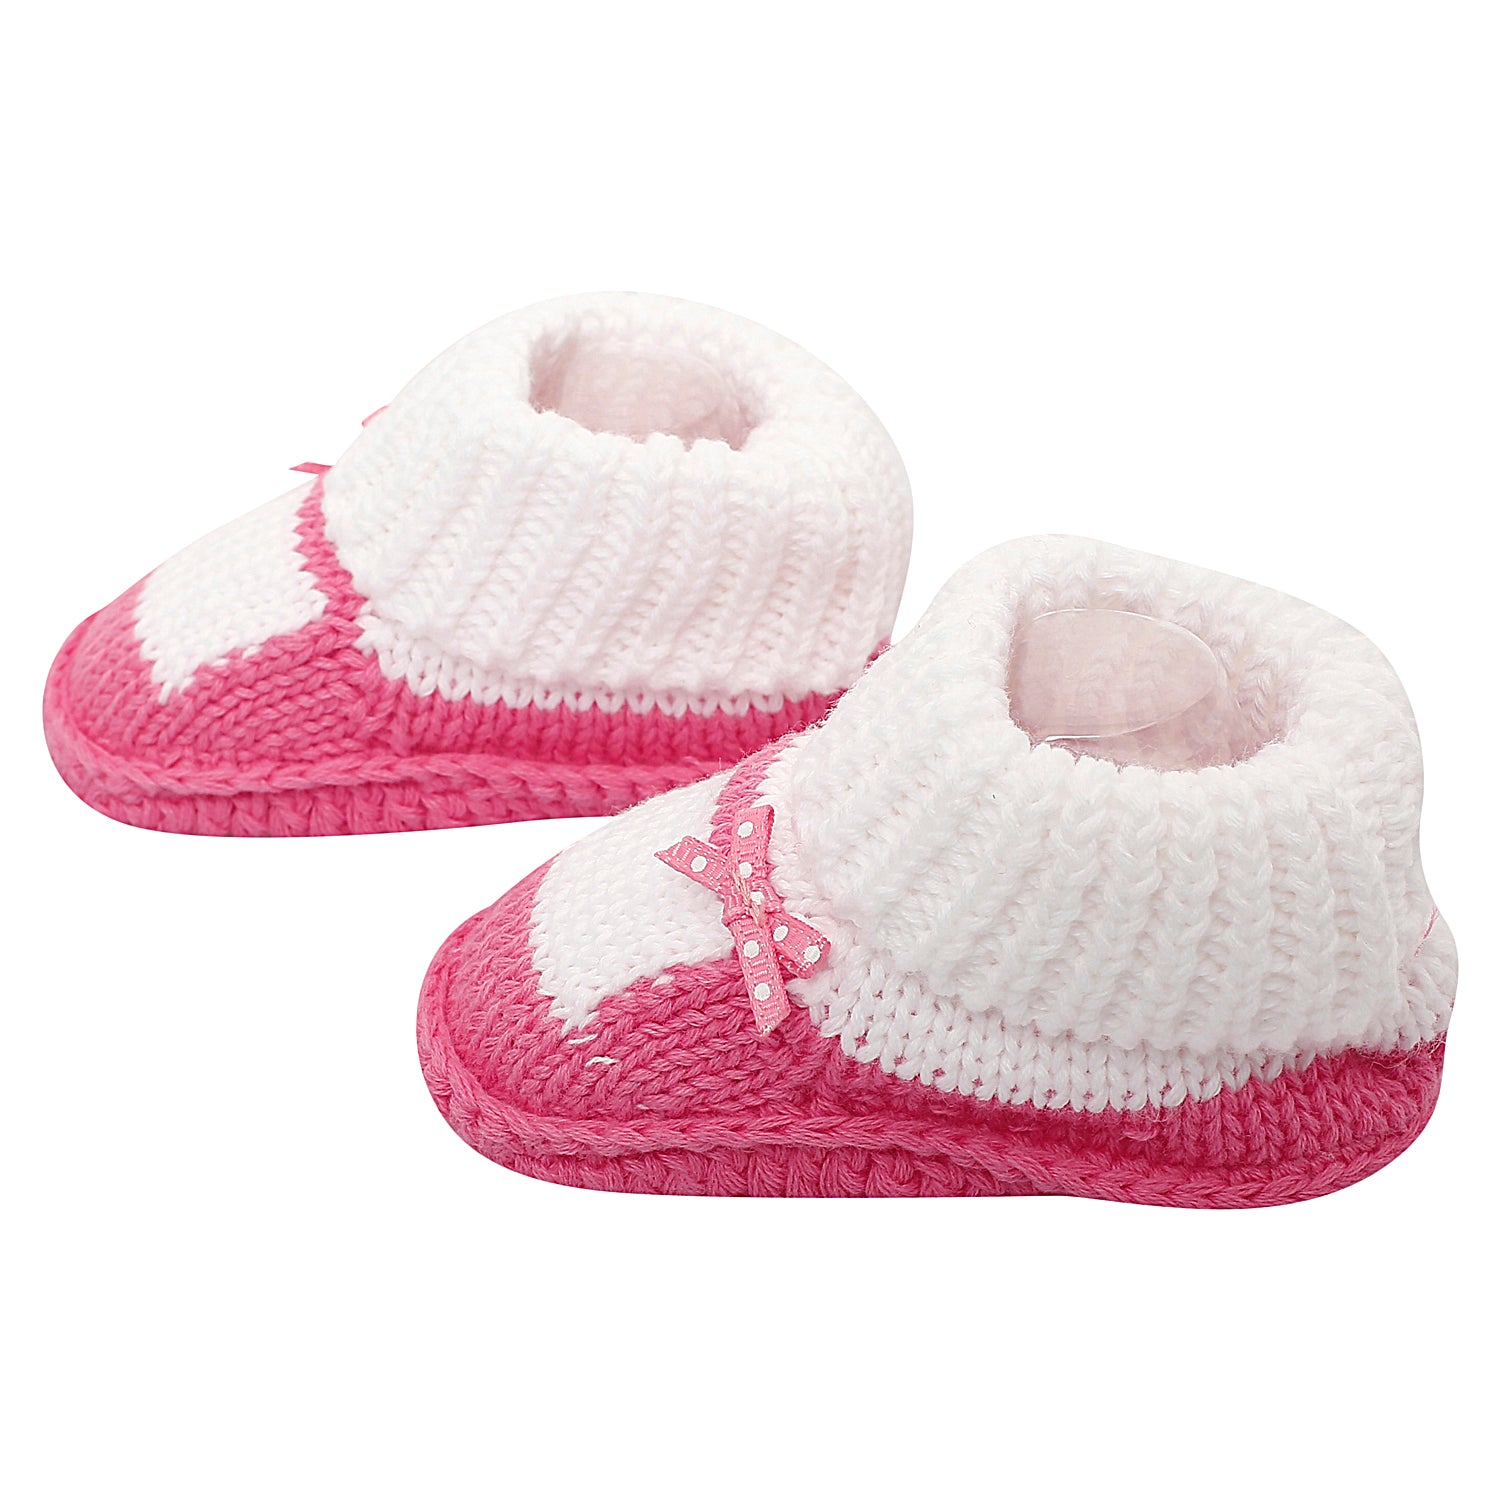 Sweet Bows White And Pink Socks Booties - Baby Moo